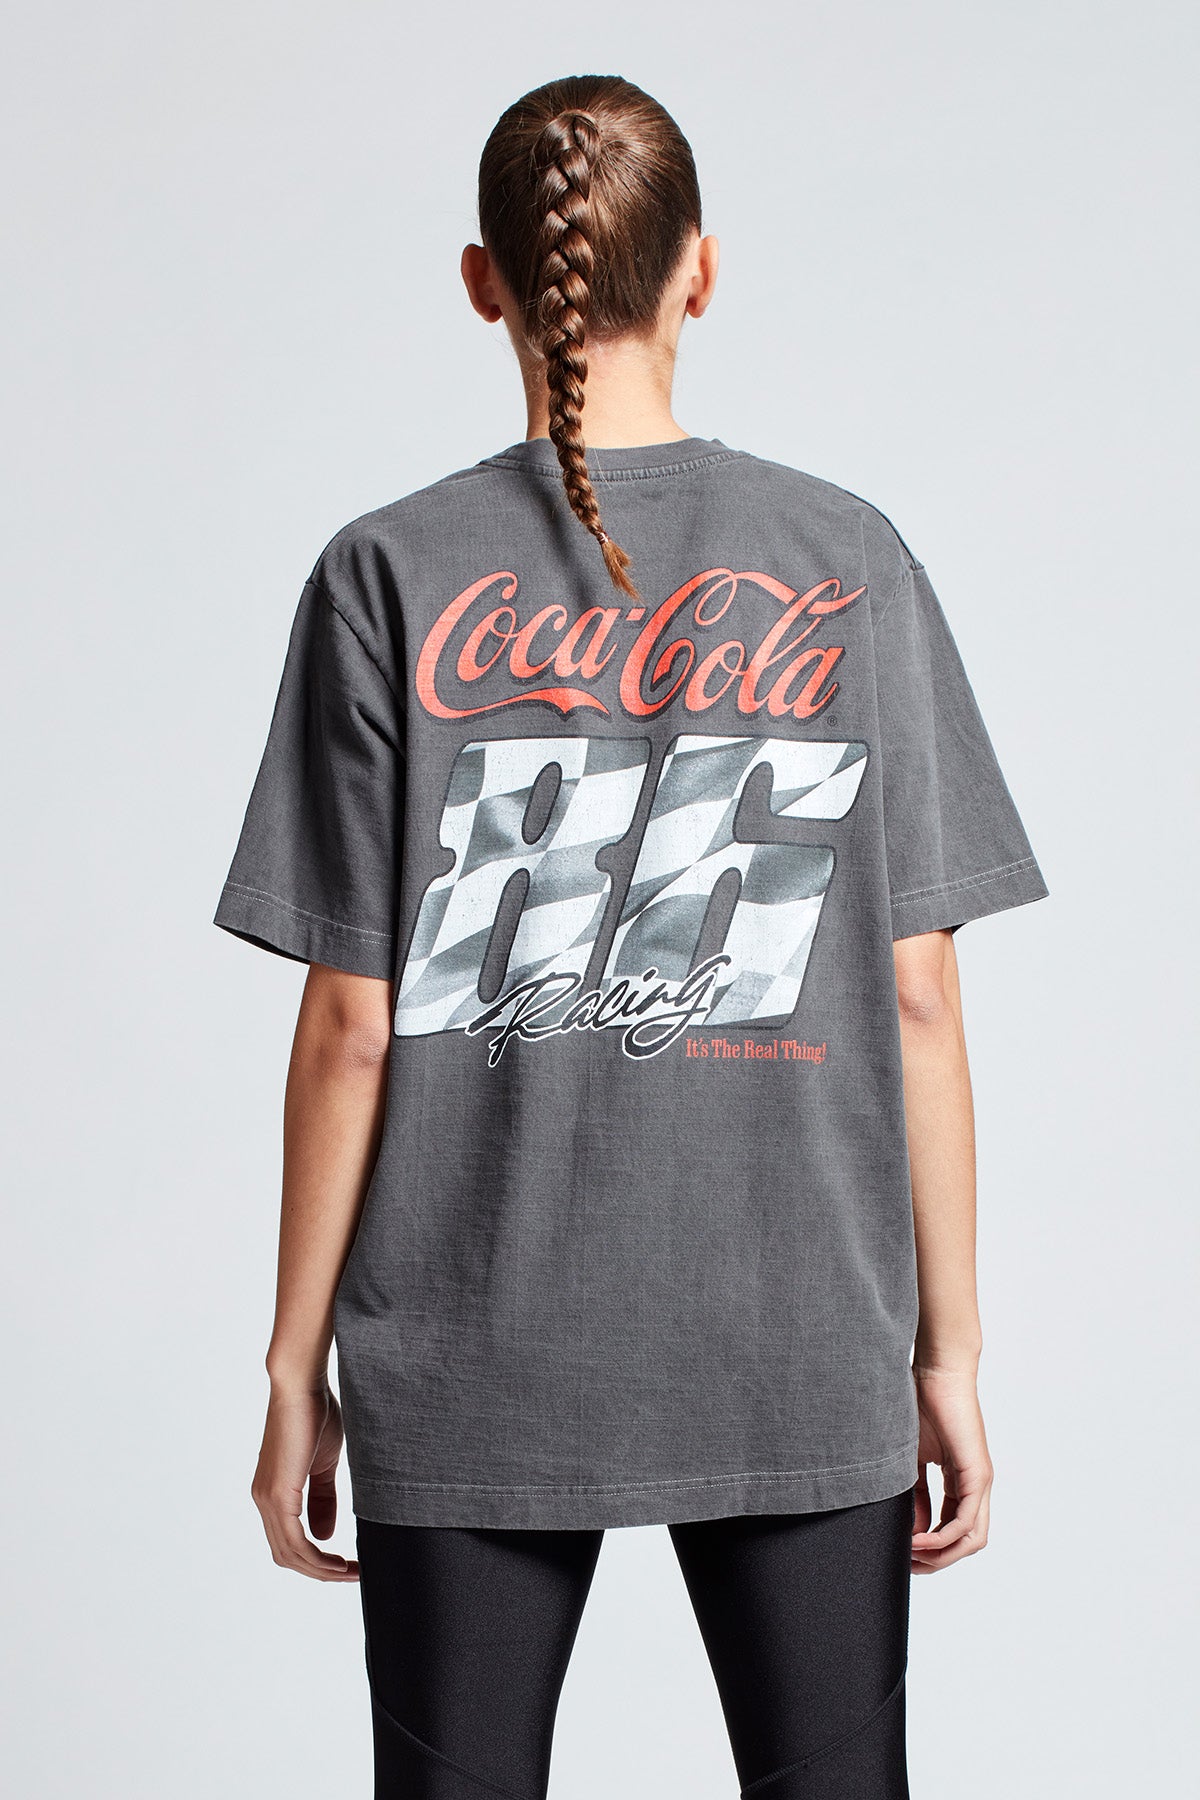 Coca-Cola Lights Out T-shirt in Washed Grey